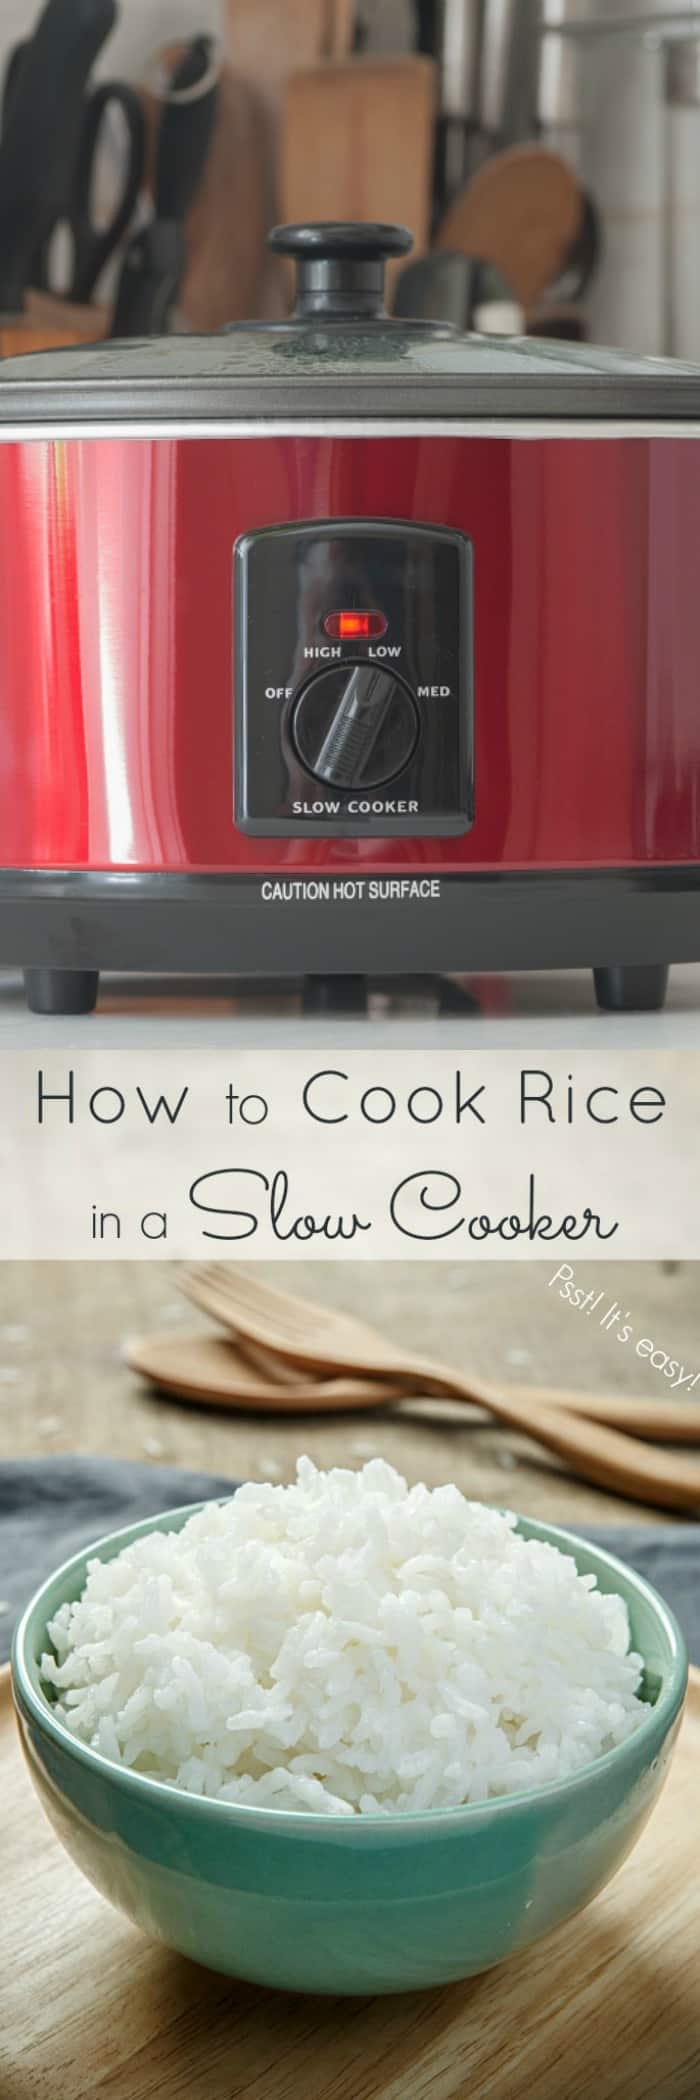 How to Cook Rice in a Slow Cooker (Crock Pot) kitchen hack